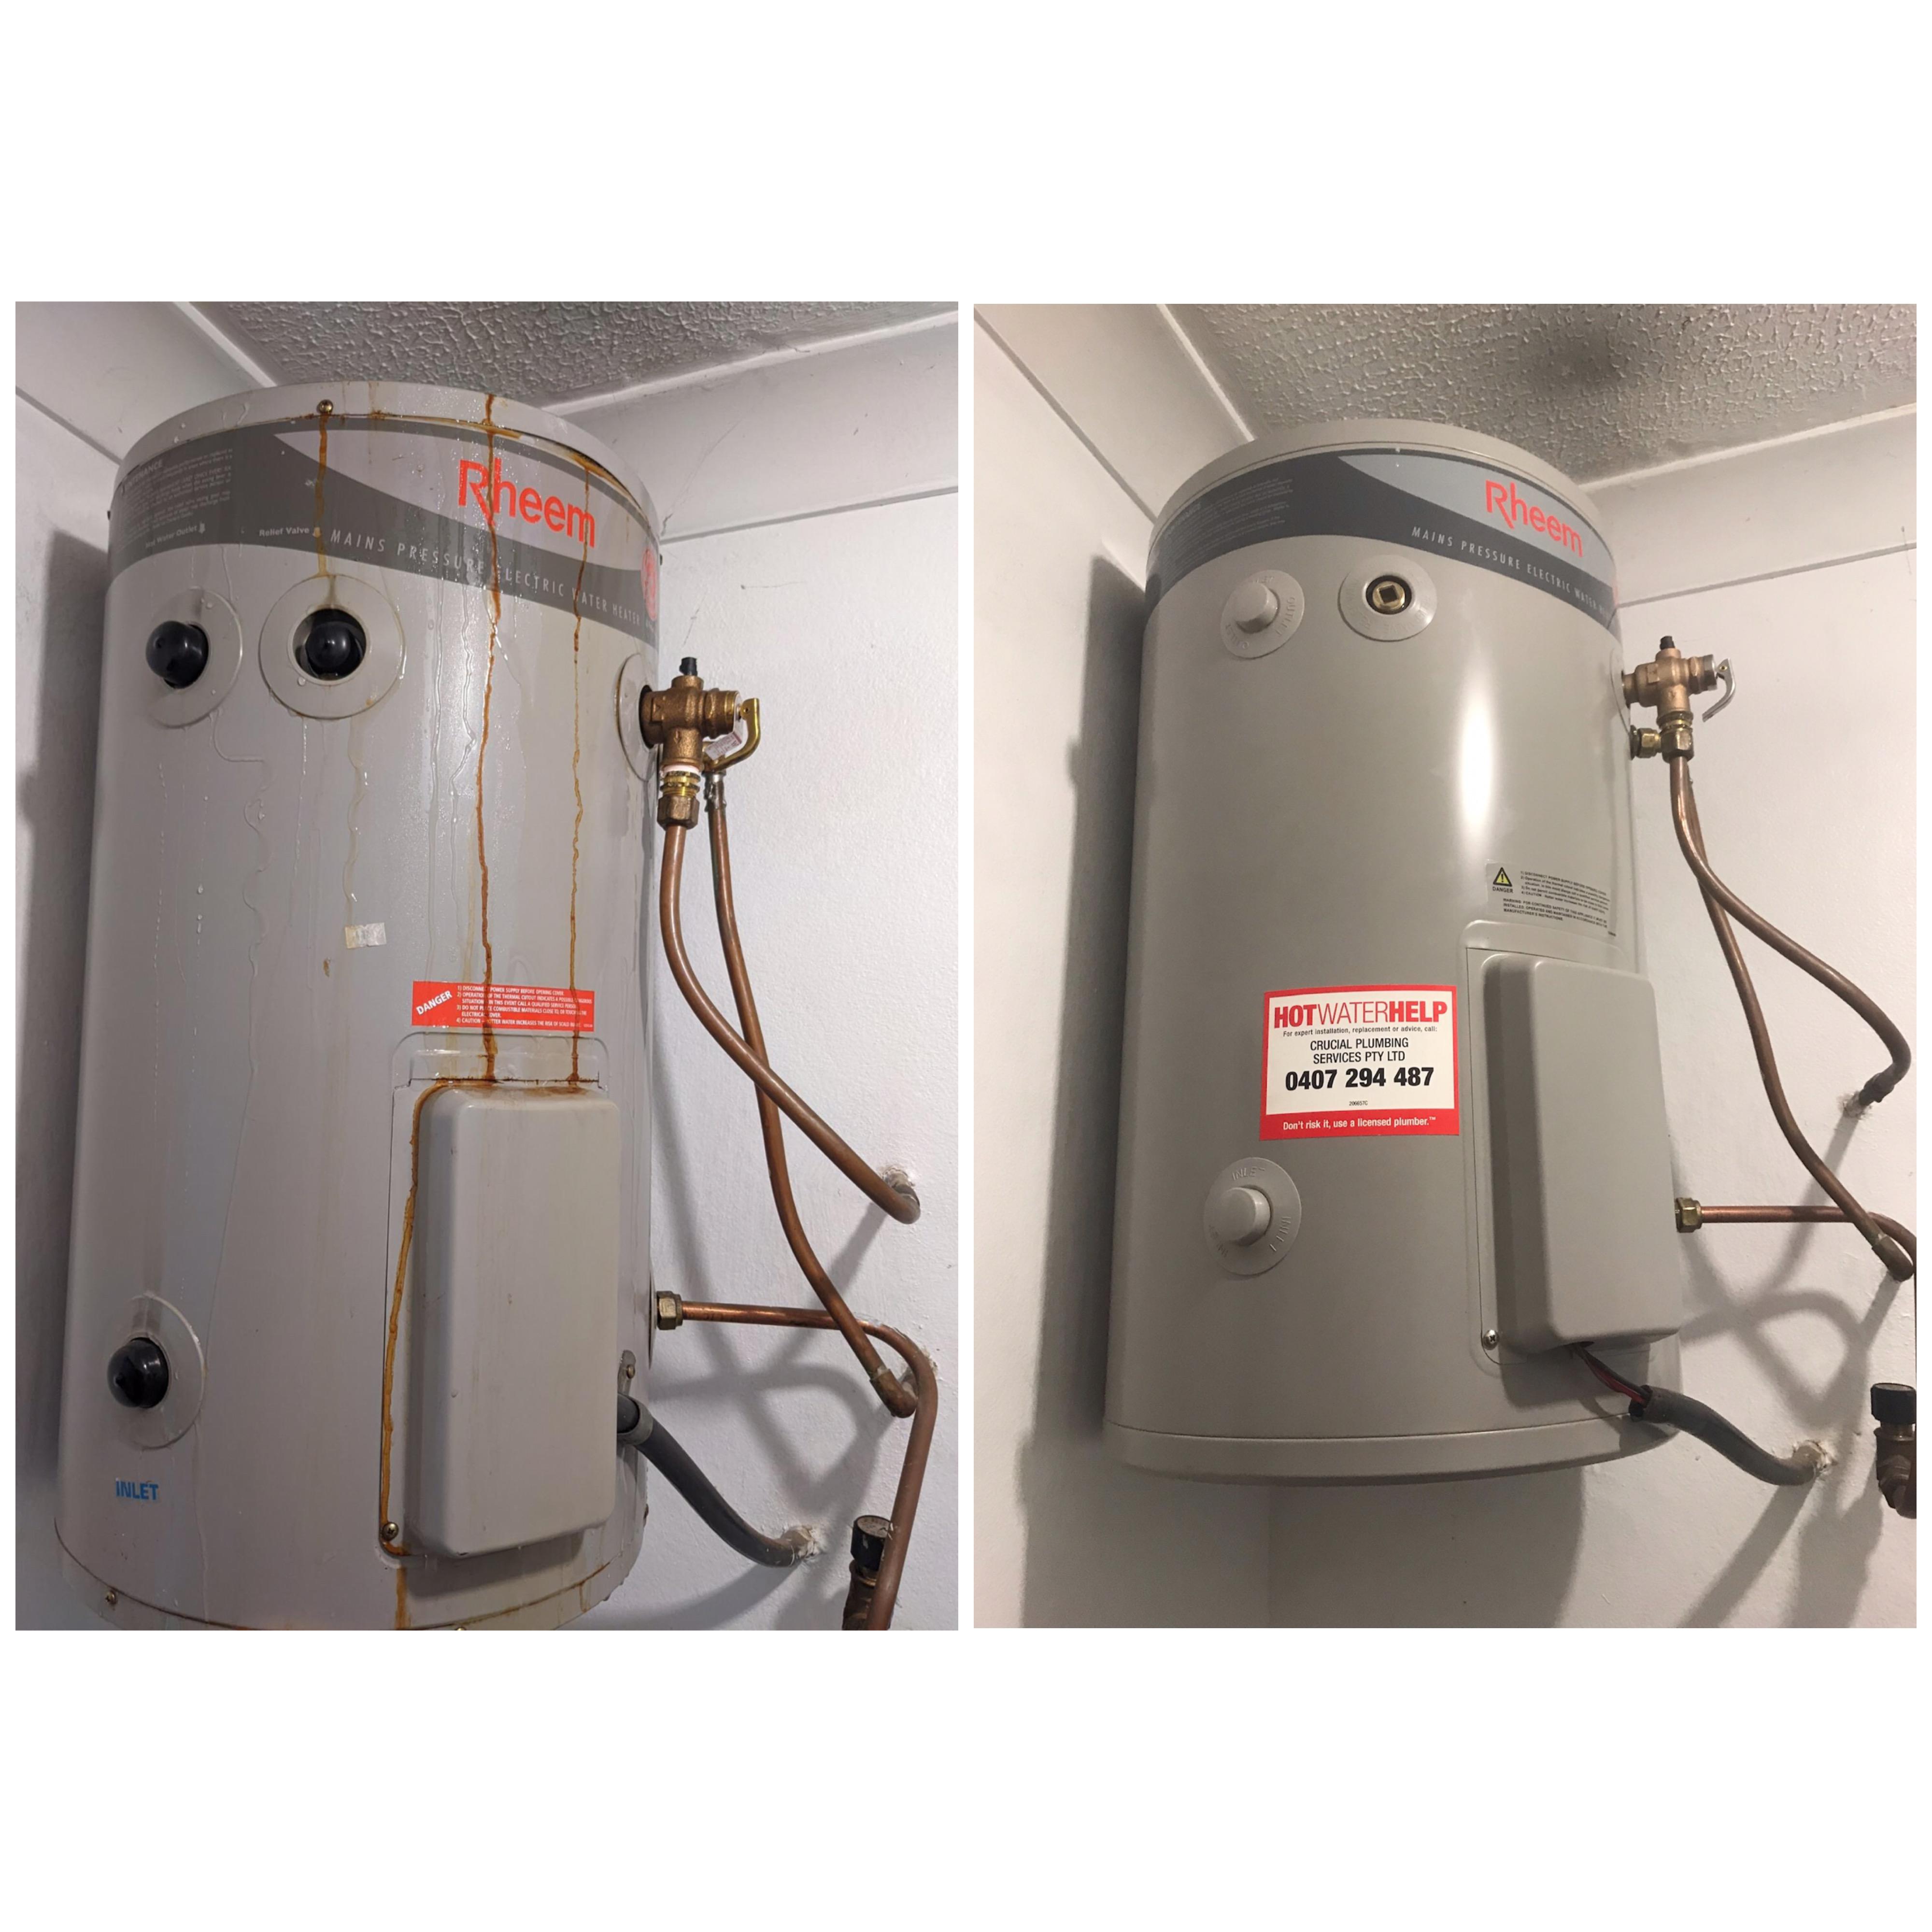 ELECTRIC WATER HEATER REPLACEMENTS CRUCIAL Plumbing Services Pty Ltd Seven Hills (02) 8041 4999